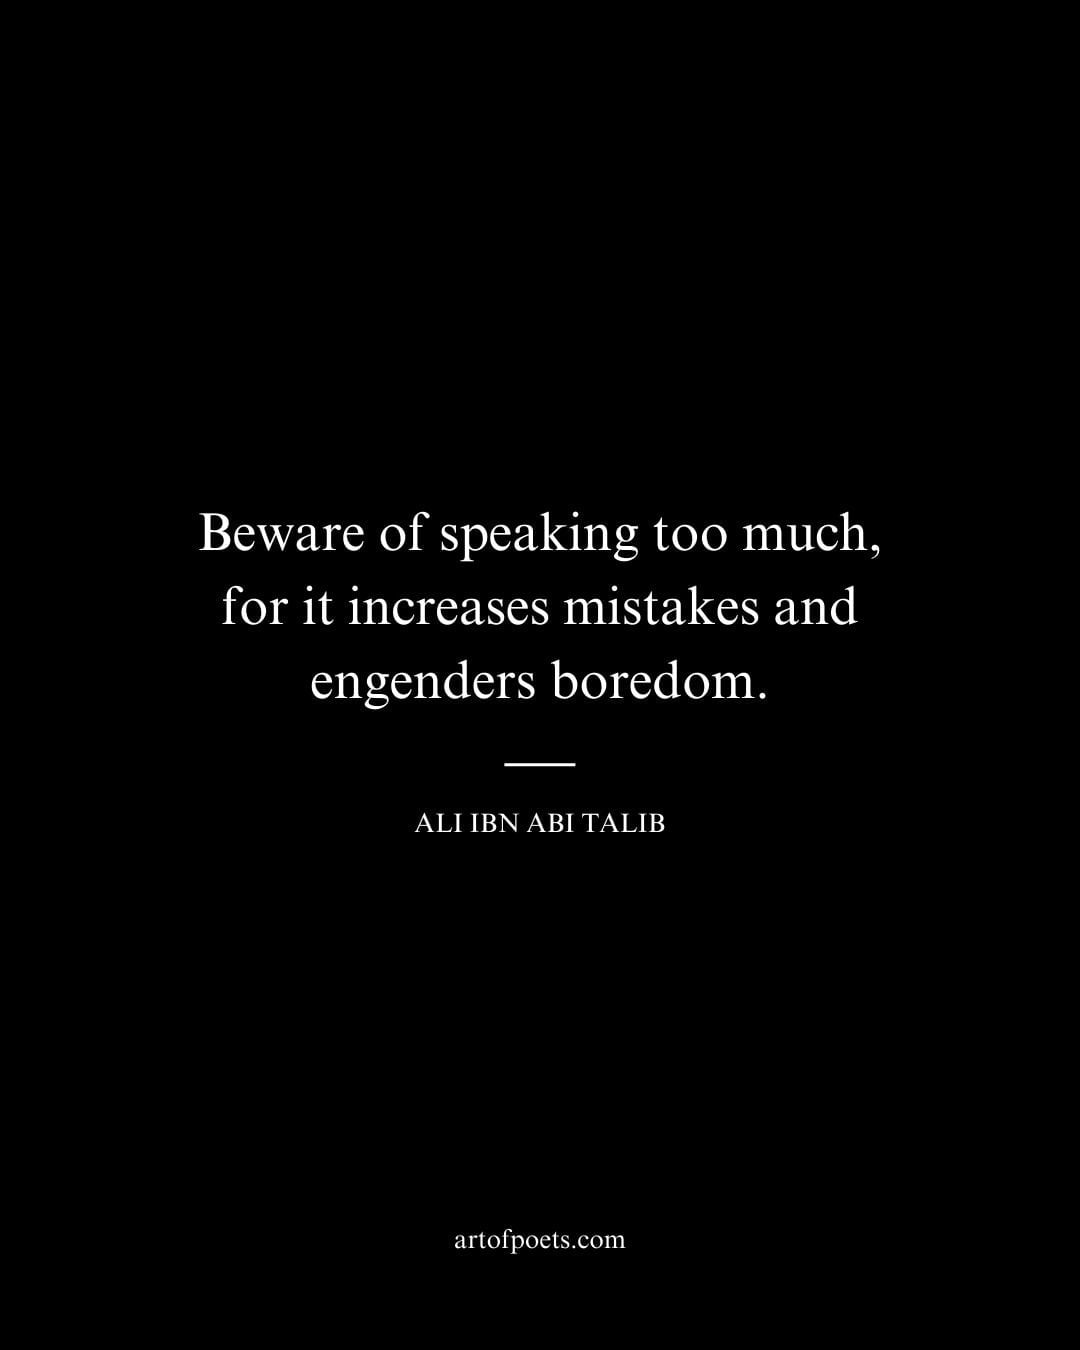 Beware of speaking too much for it increases mistakes and engenders boredom